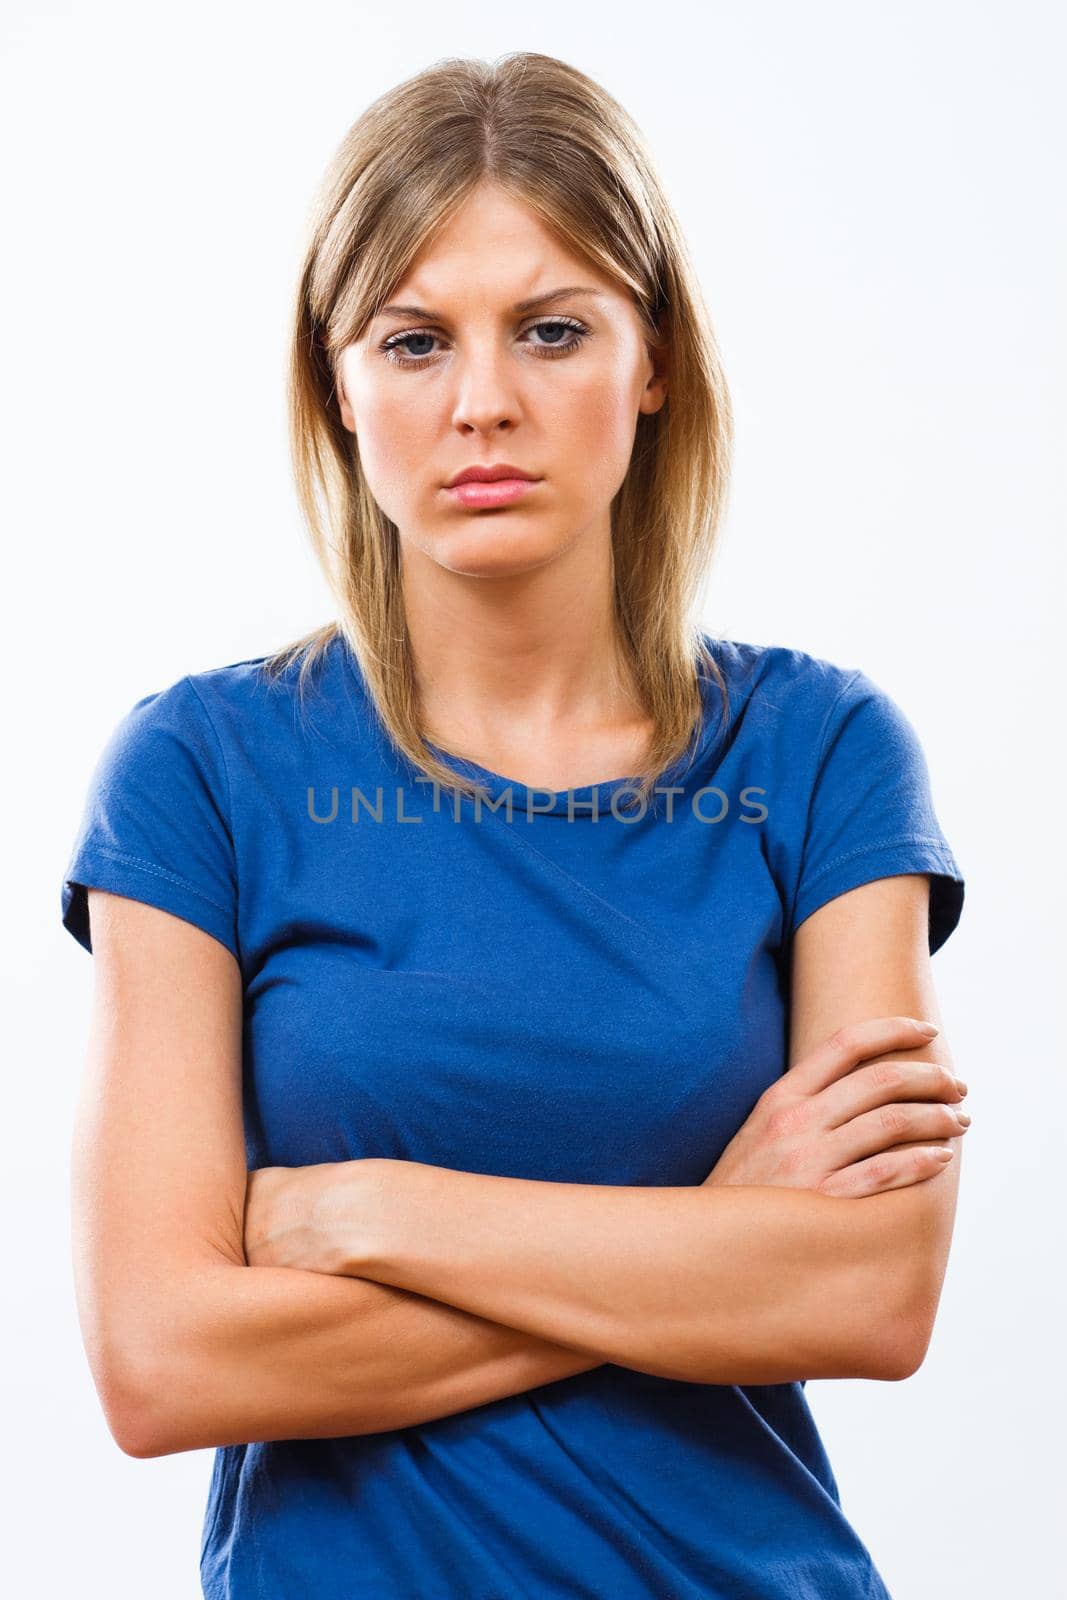 Sad young woman isolated on white background